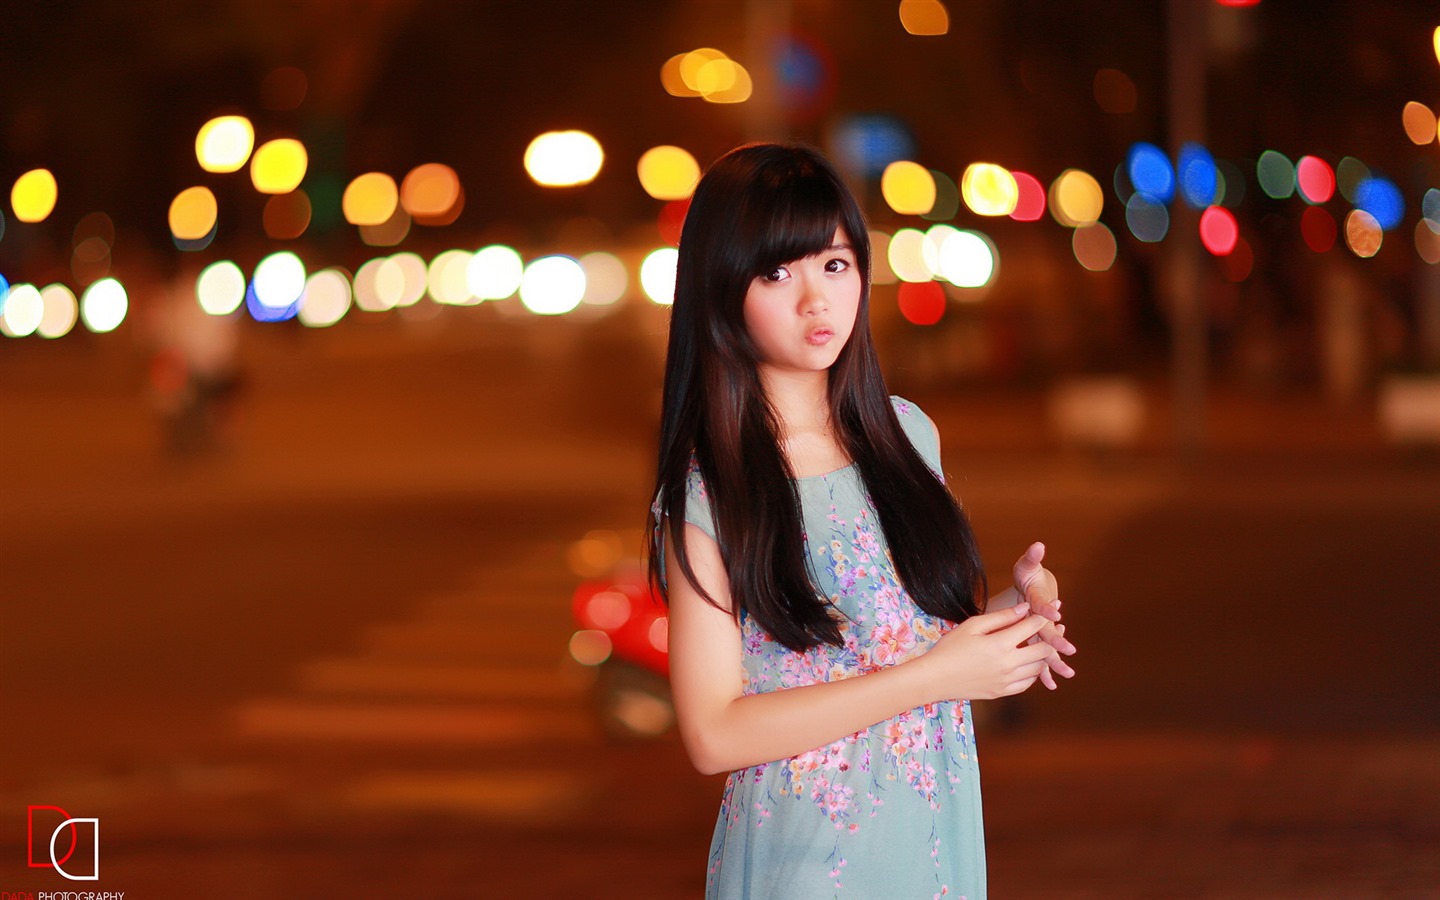 Pure and lovely young Asian girl HD wallpapers collection (3) #27 - 1440x900